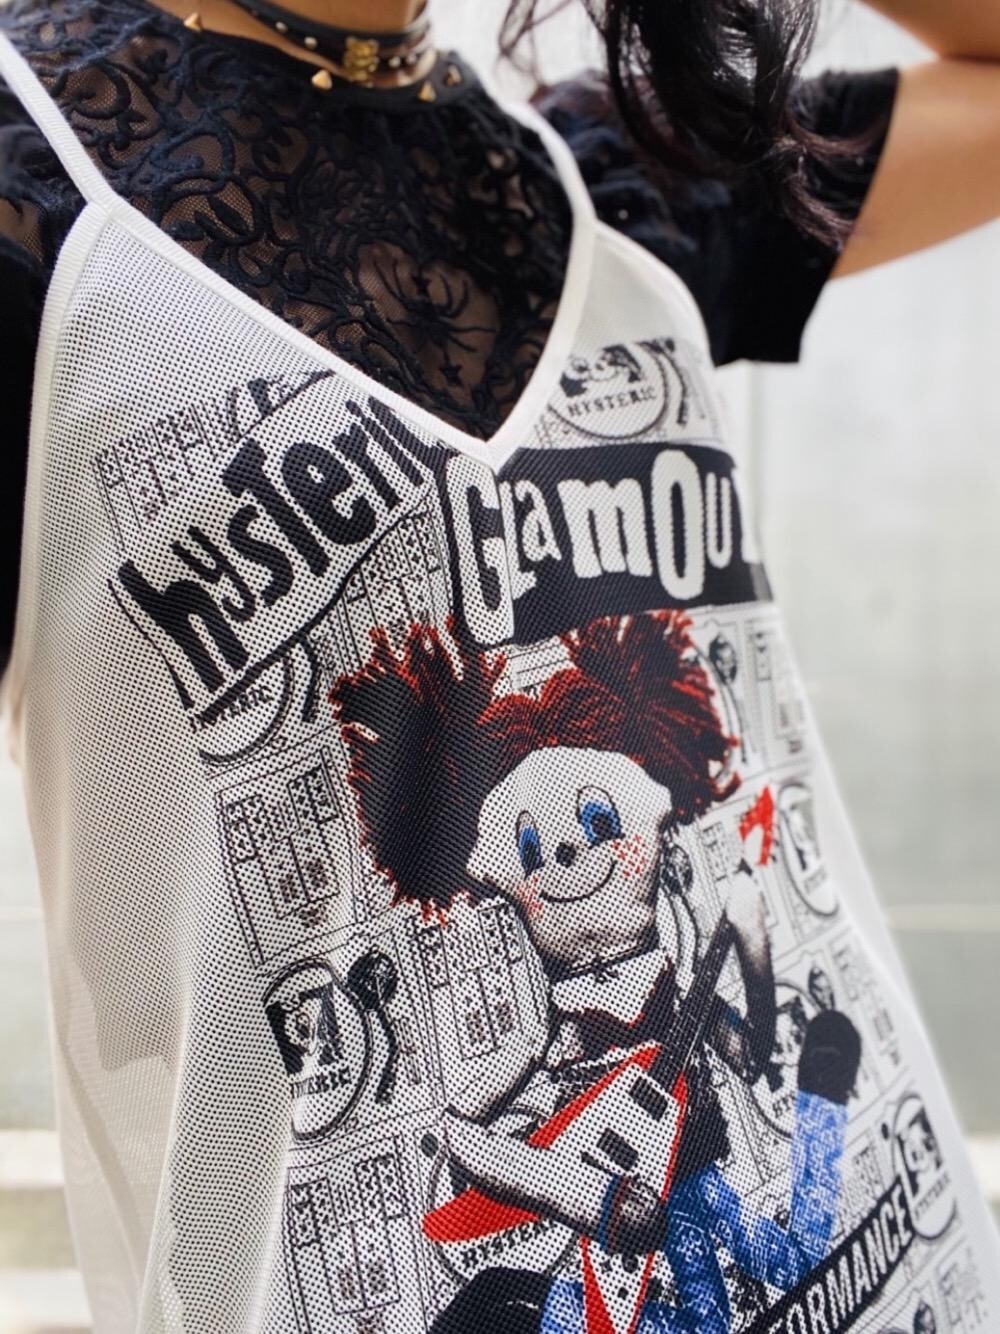 HYSTERIC GLAMOUR（ヒステリックグラマー）の「SPIDER LACE Tシャツ（T ...